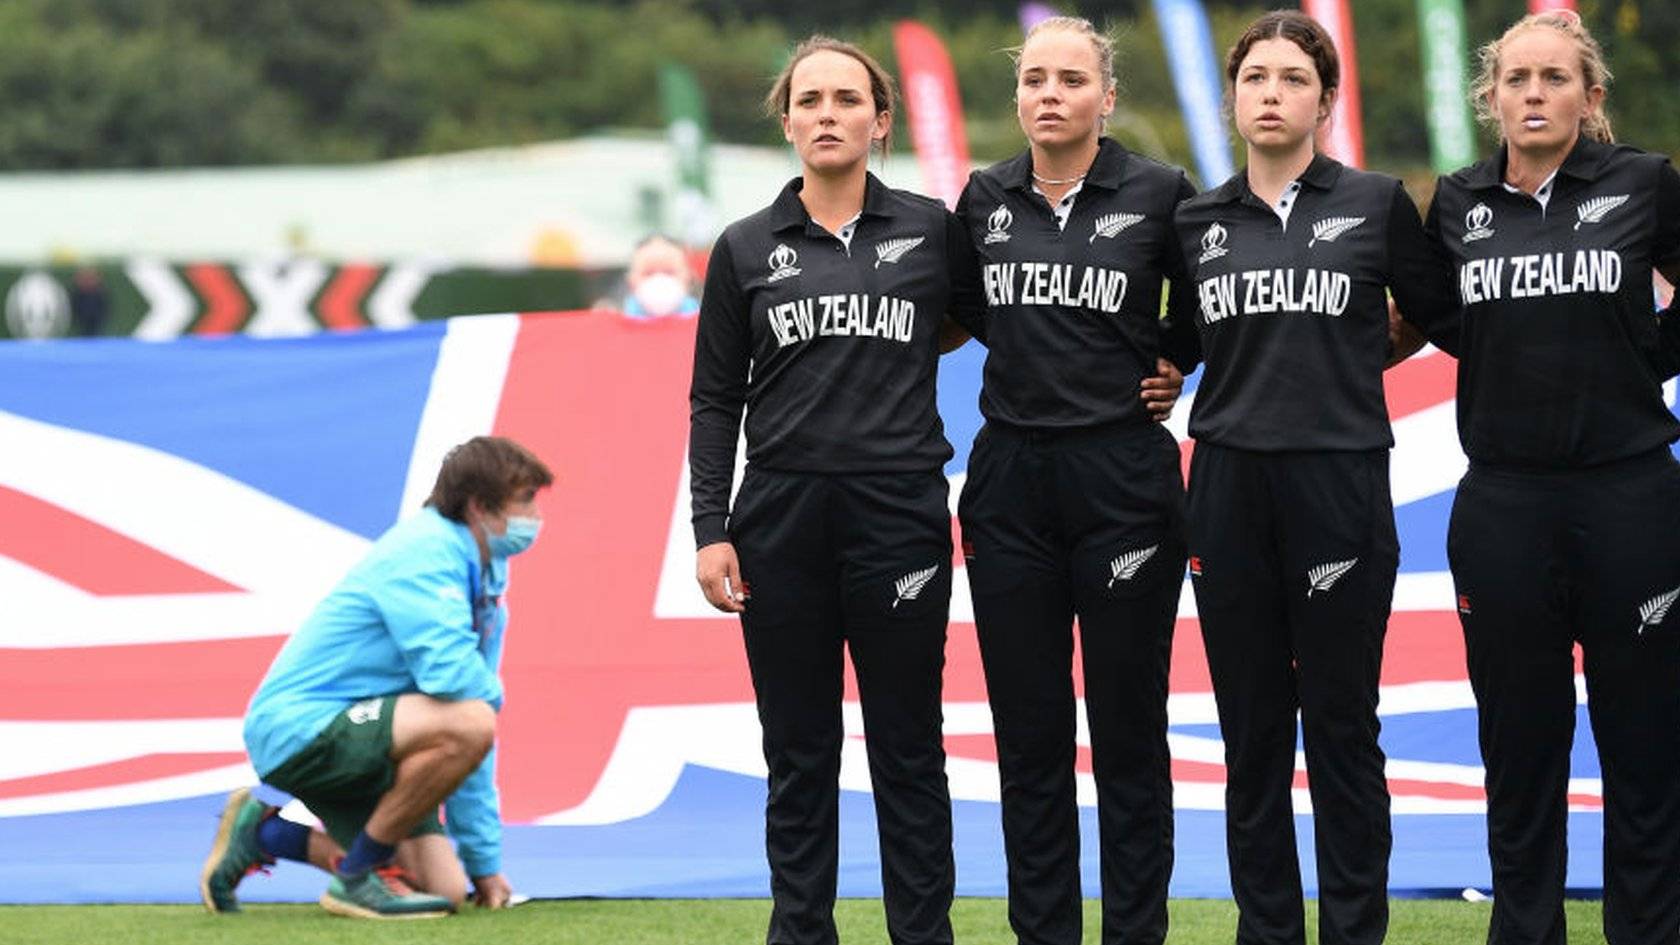 Women's World Cup LIVE New Zealand v South Africa score & commentary